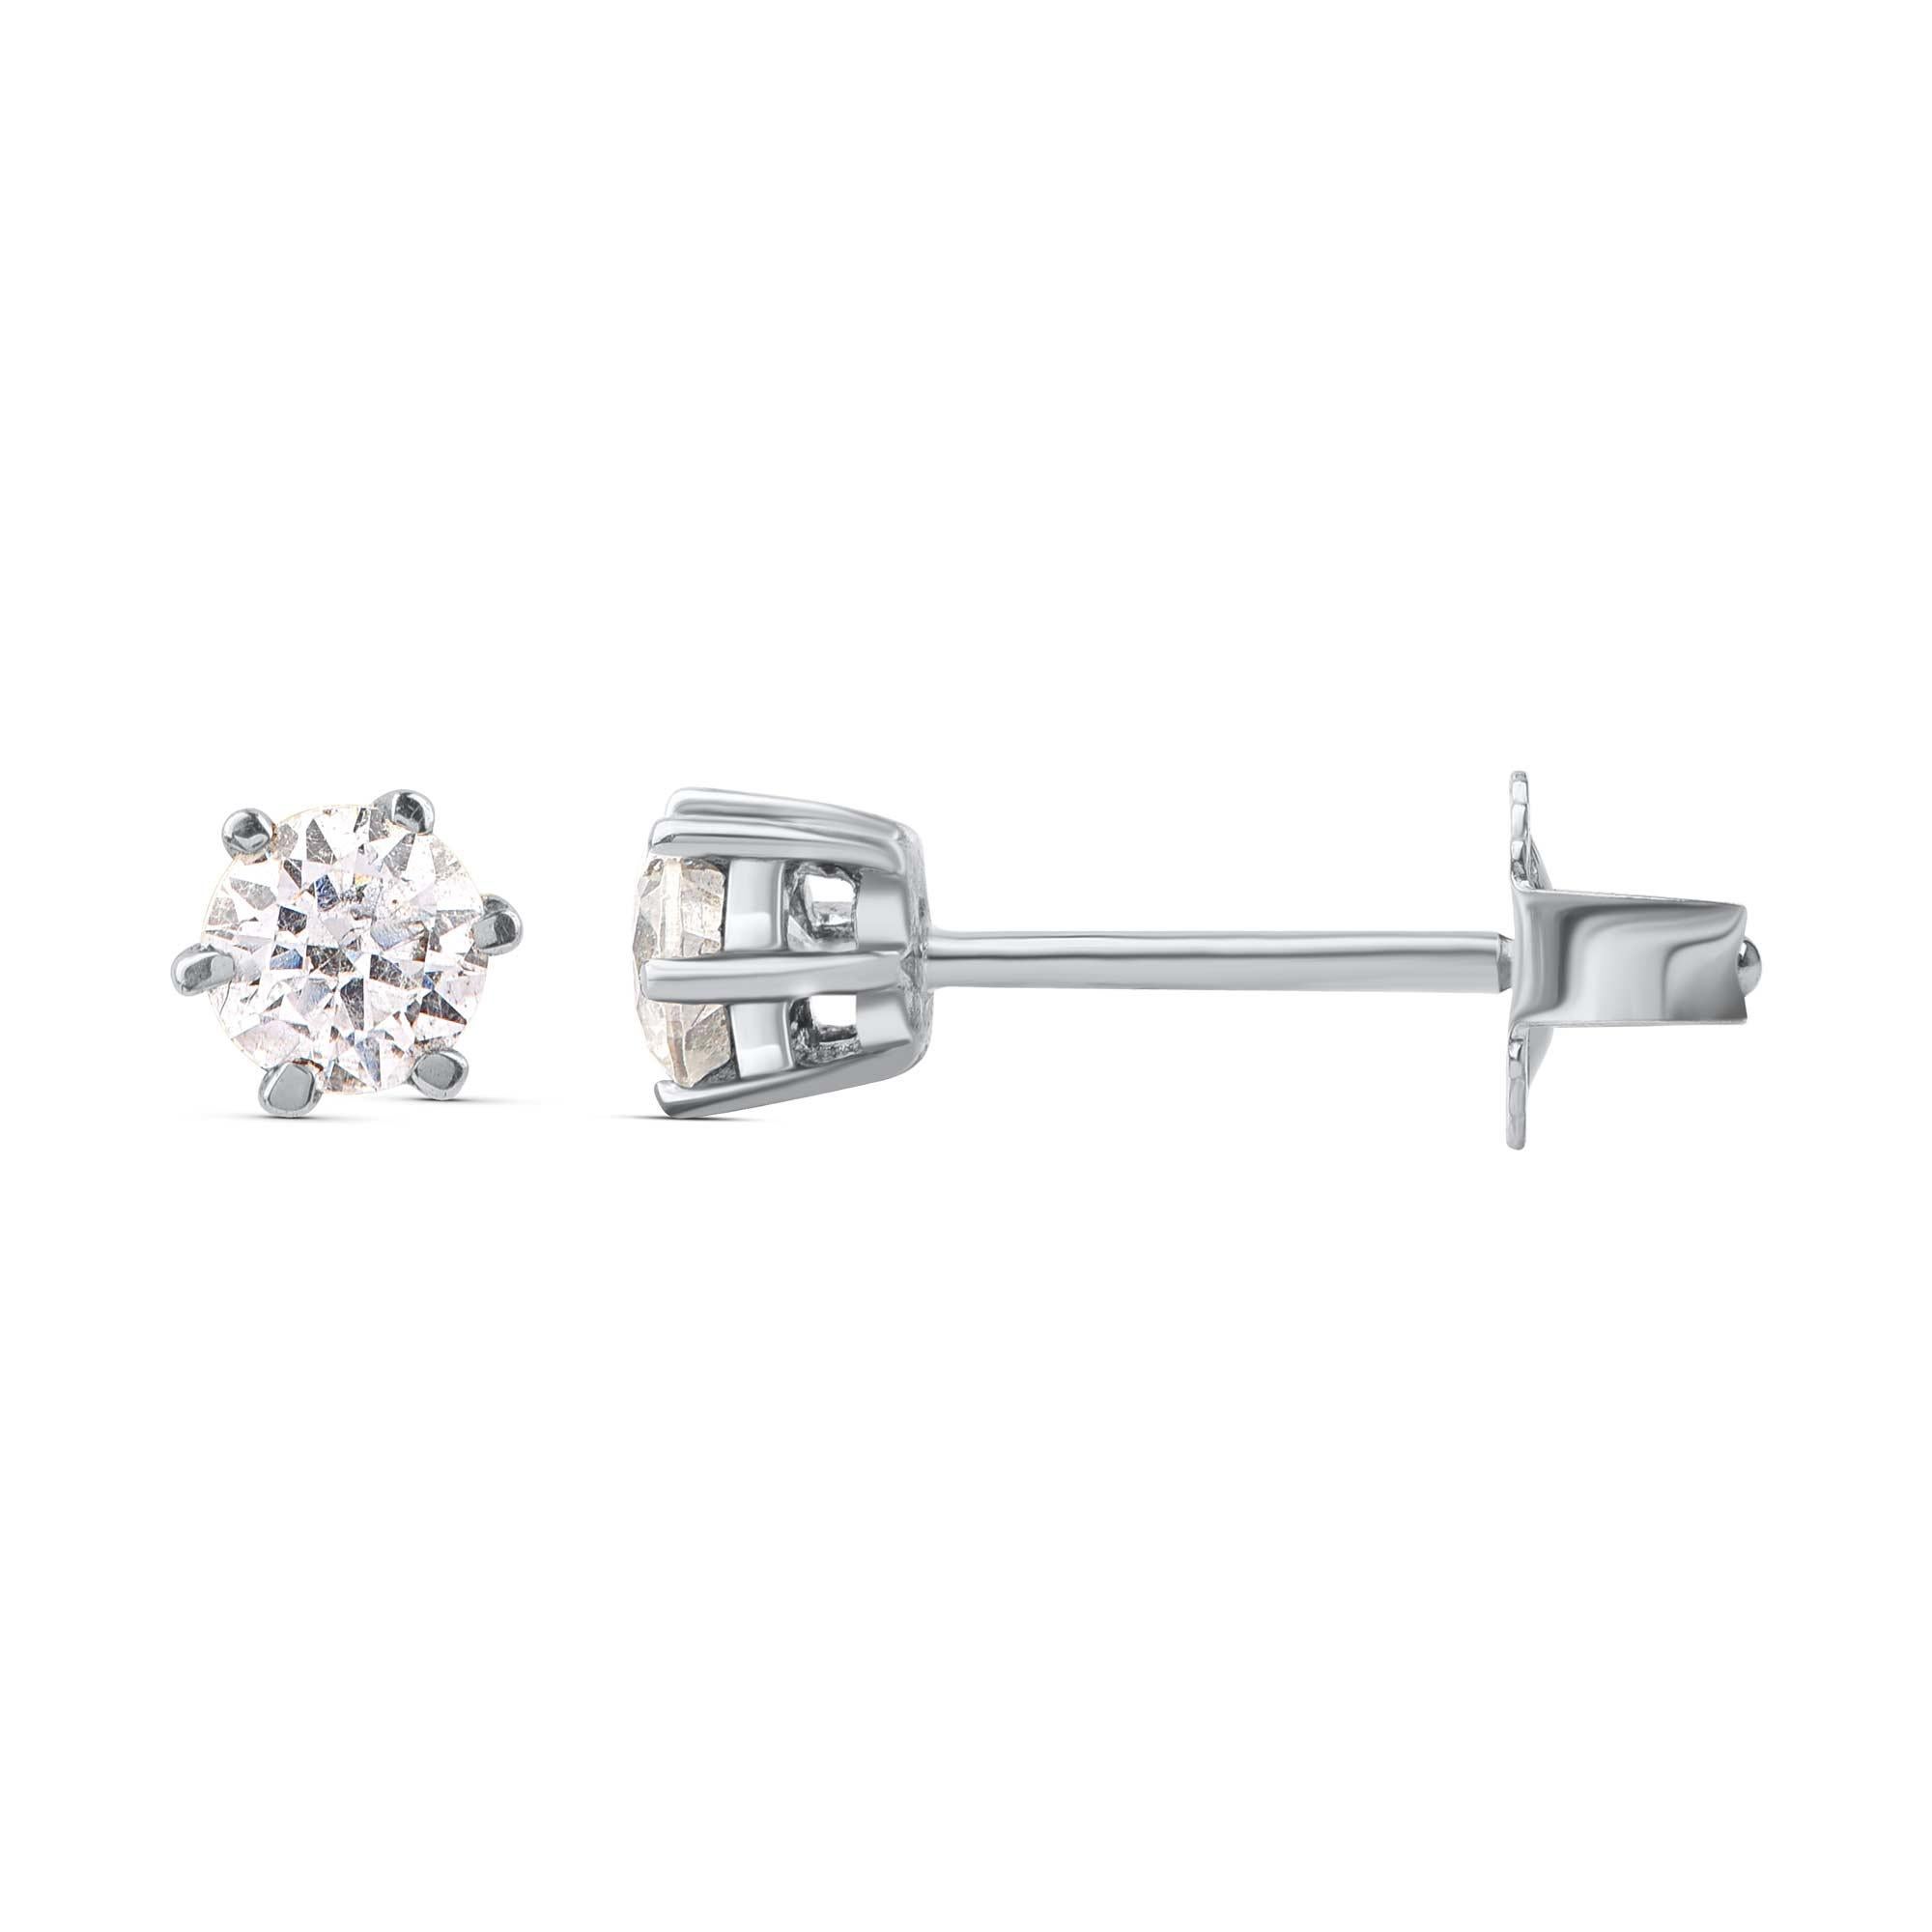 Contemporary TJD 0.25 Carat Natural Diamond 18 Karat White Gold Six Prong Solitaire Earrings For Sale